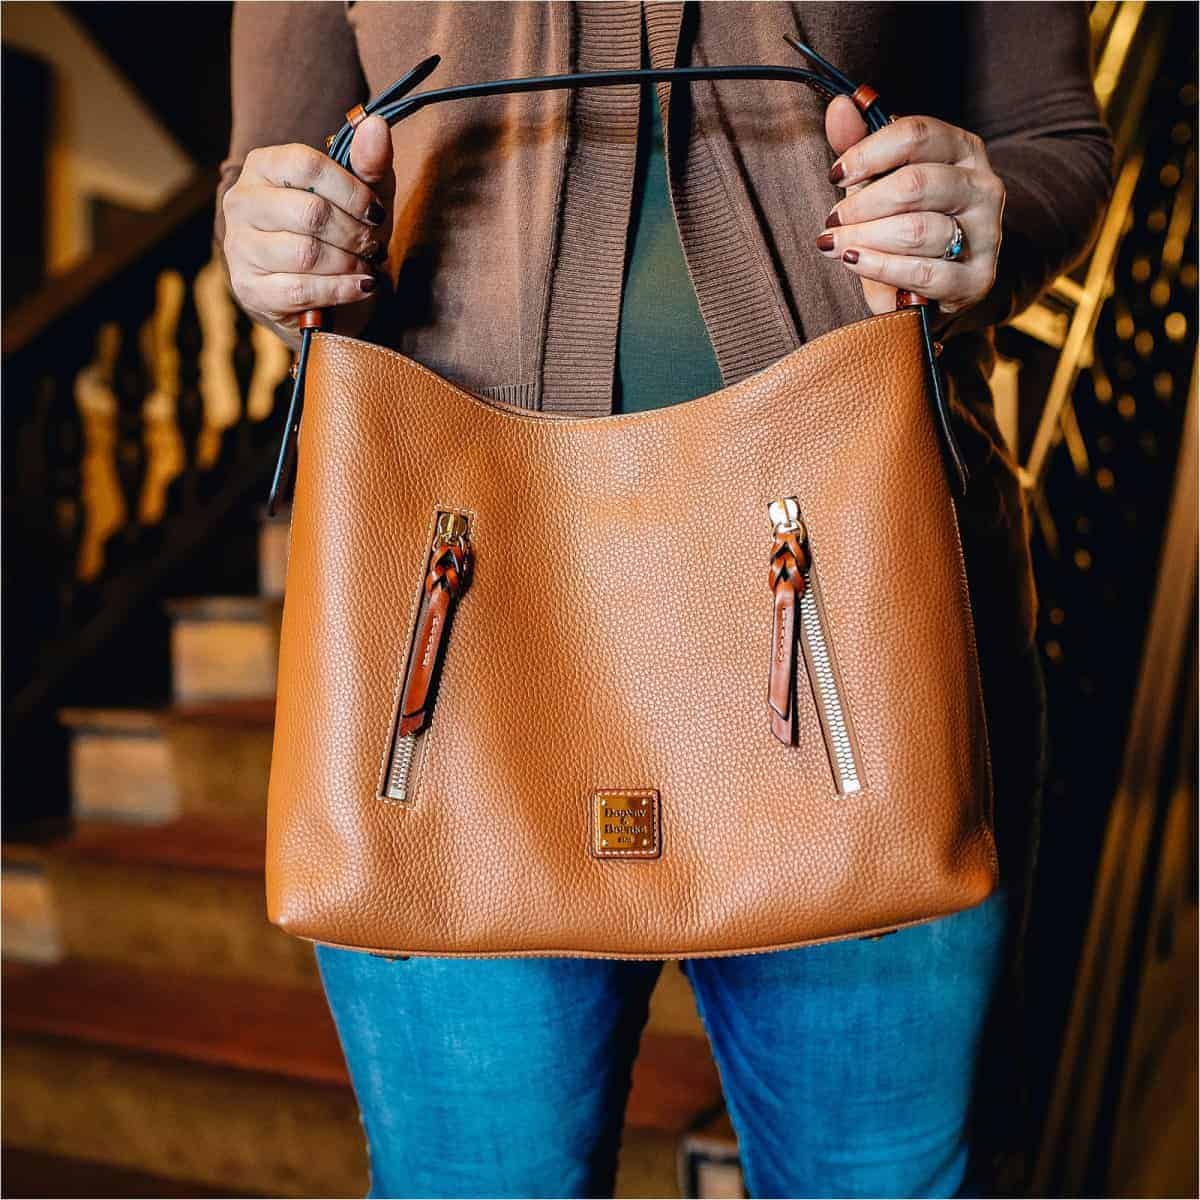 Dooney & Bourke Win-A-Dooney All Weather Leather Sweepstakes